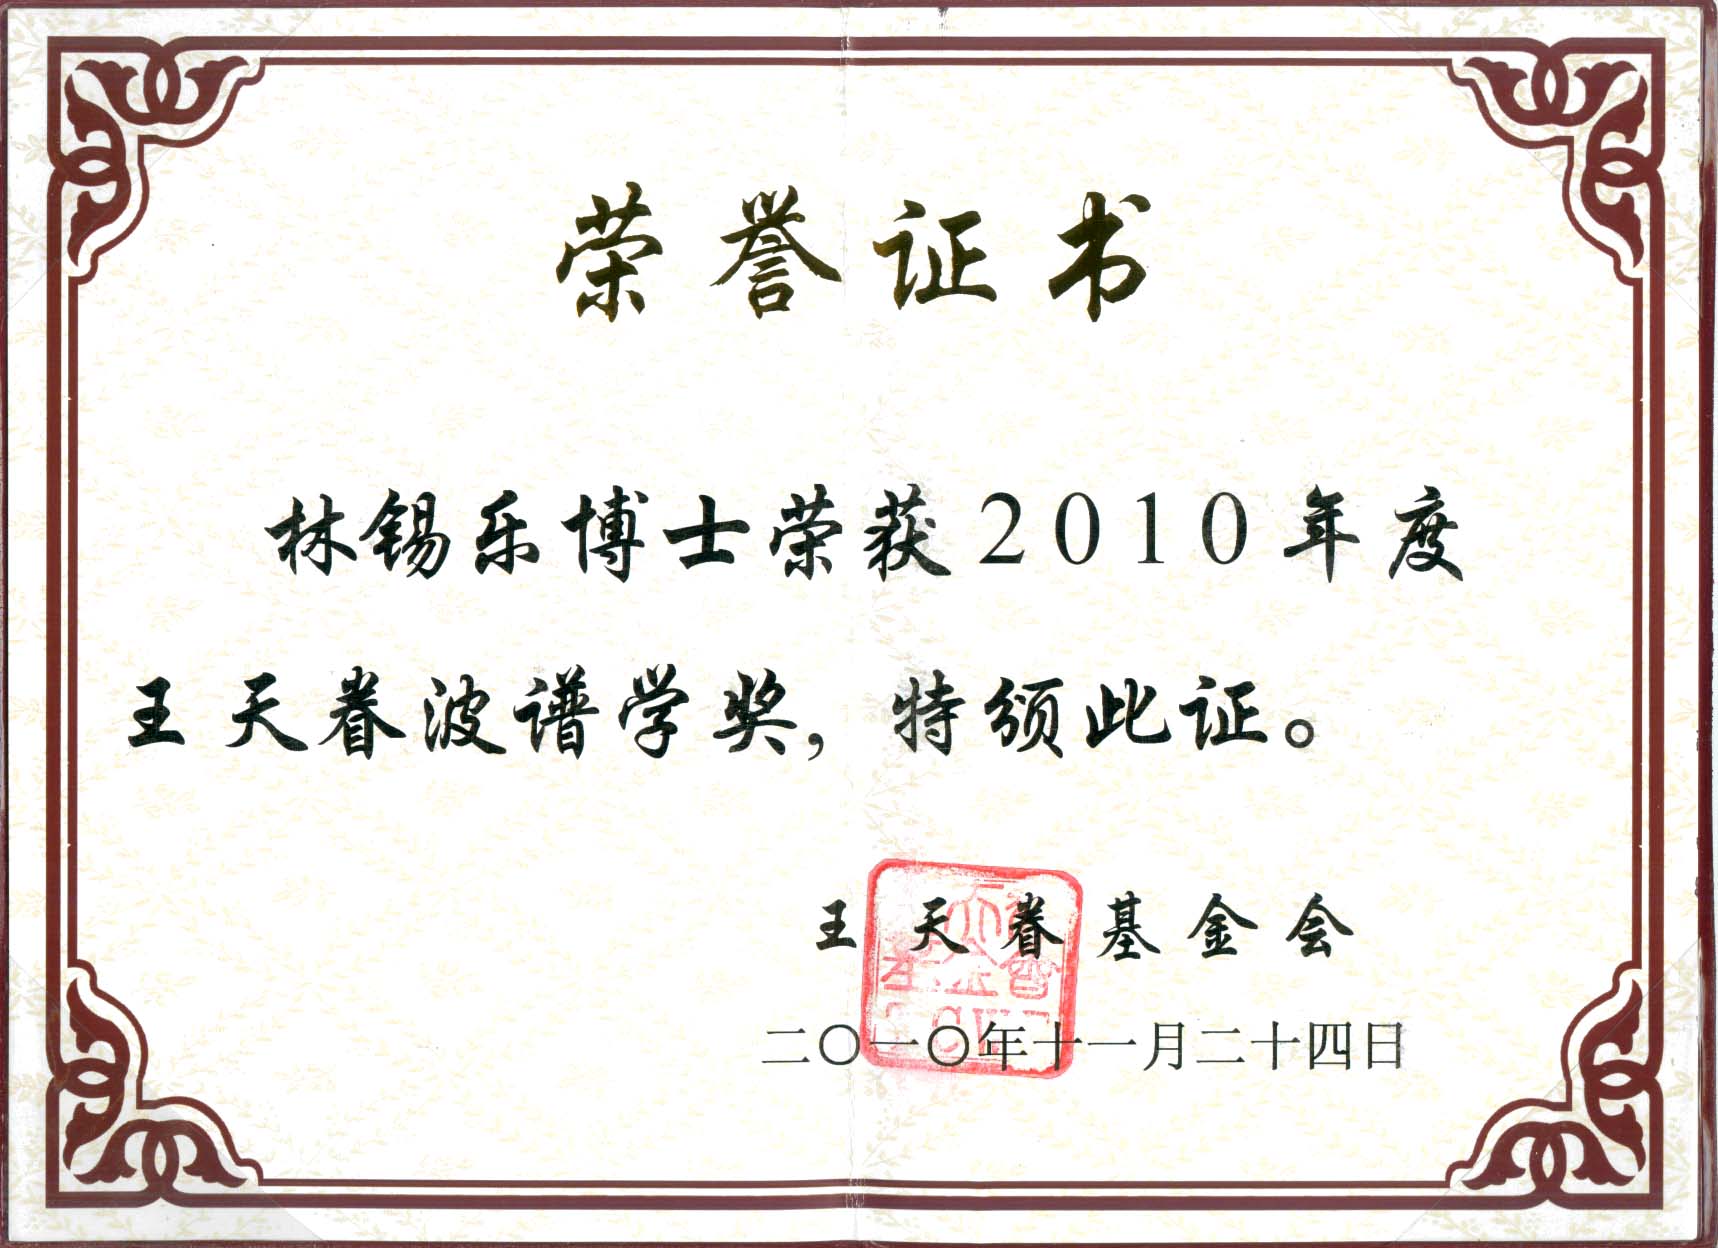 certificate of the Wang Tien-Chuan Prize in Spectroscopy Prof. S.L. Lam received.